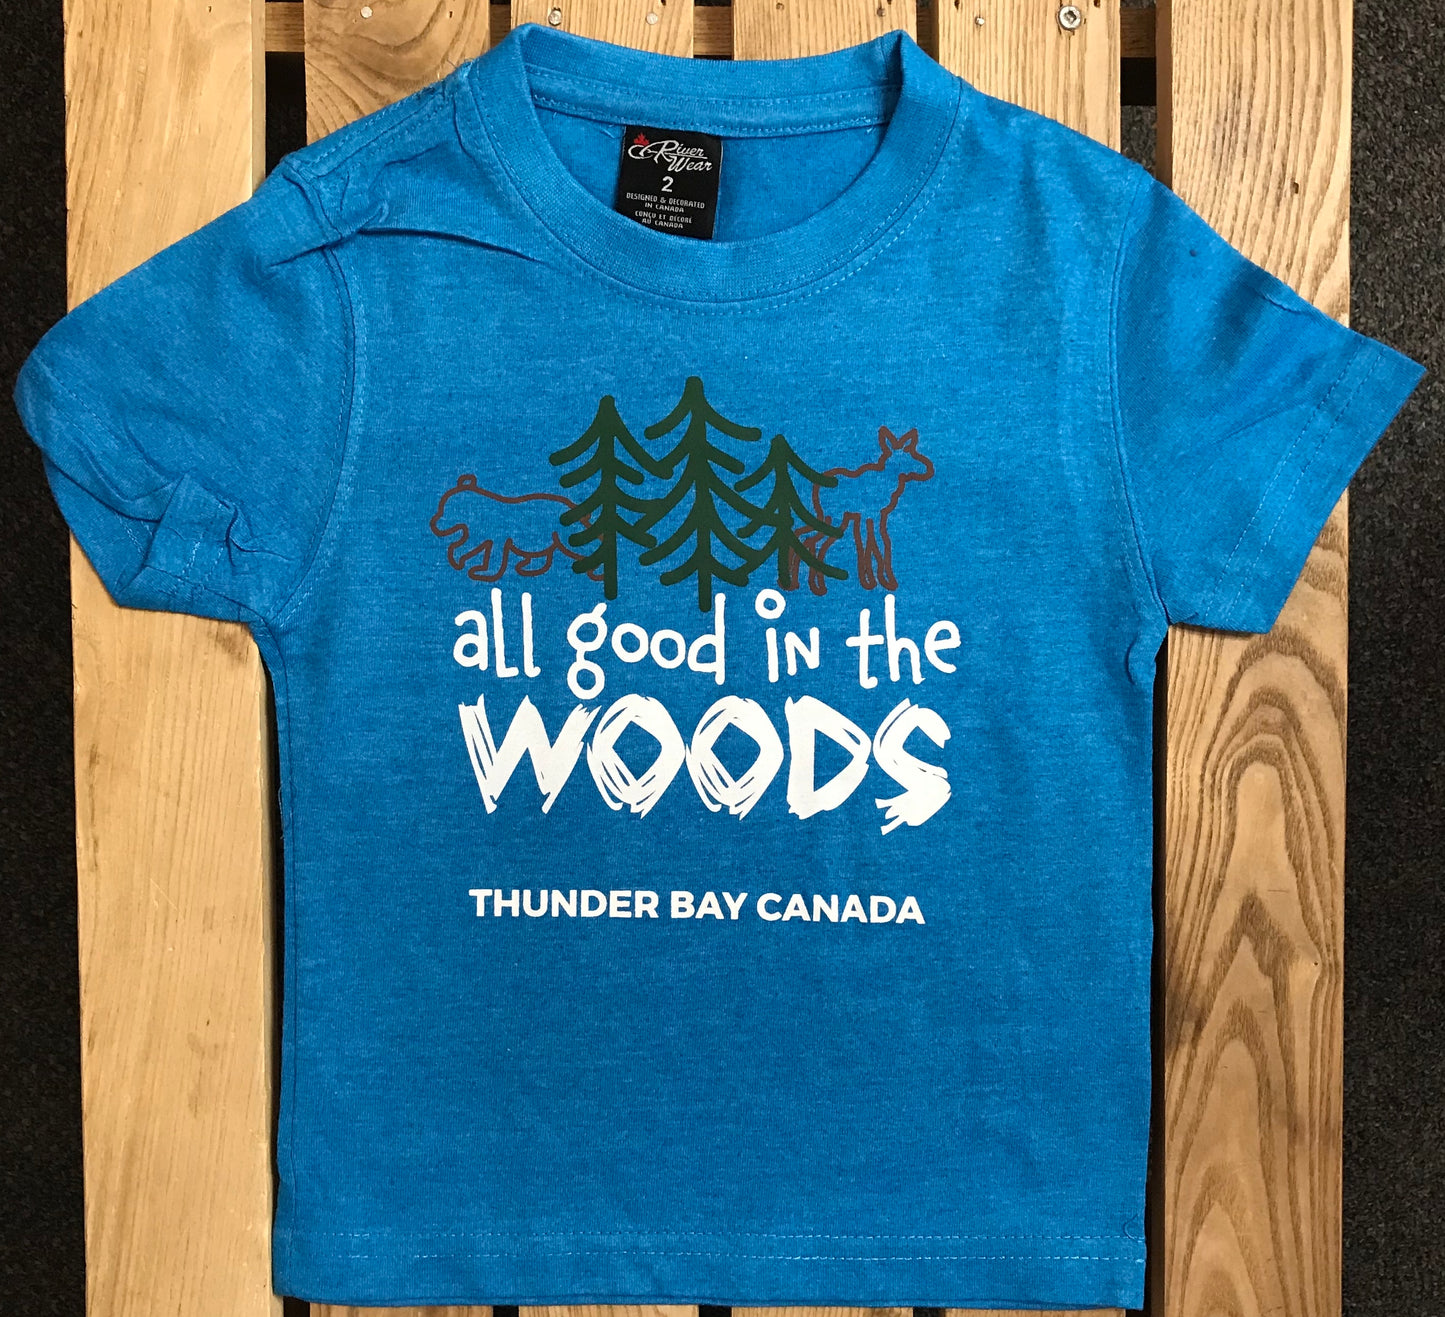 Kid's T-shirt - "All Good in the Woods", Thunder Bay, Canada - Blue